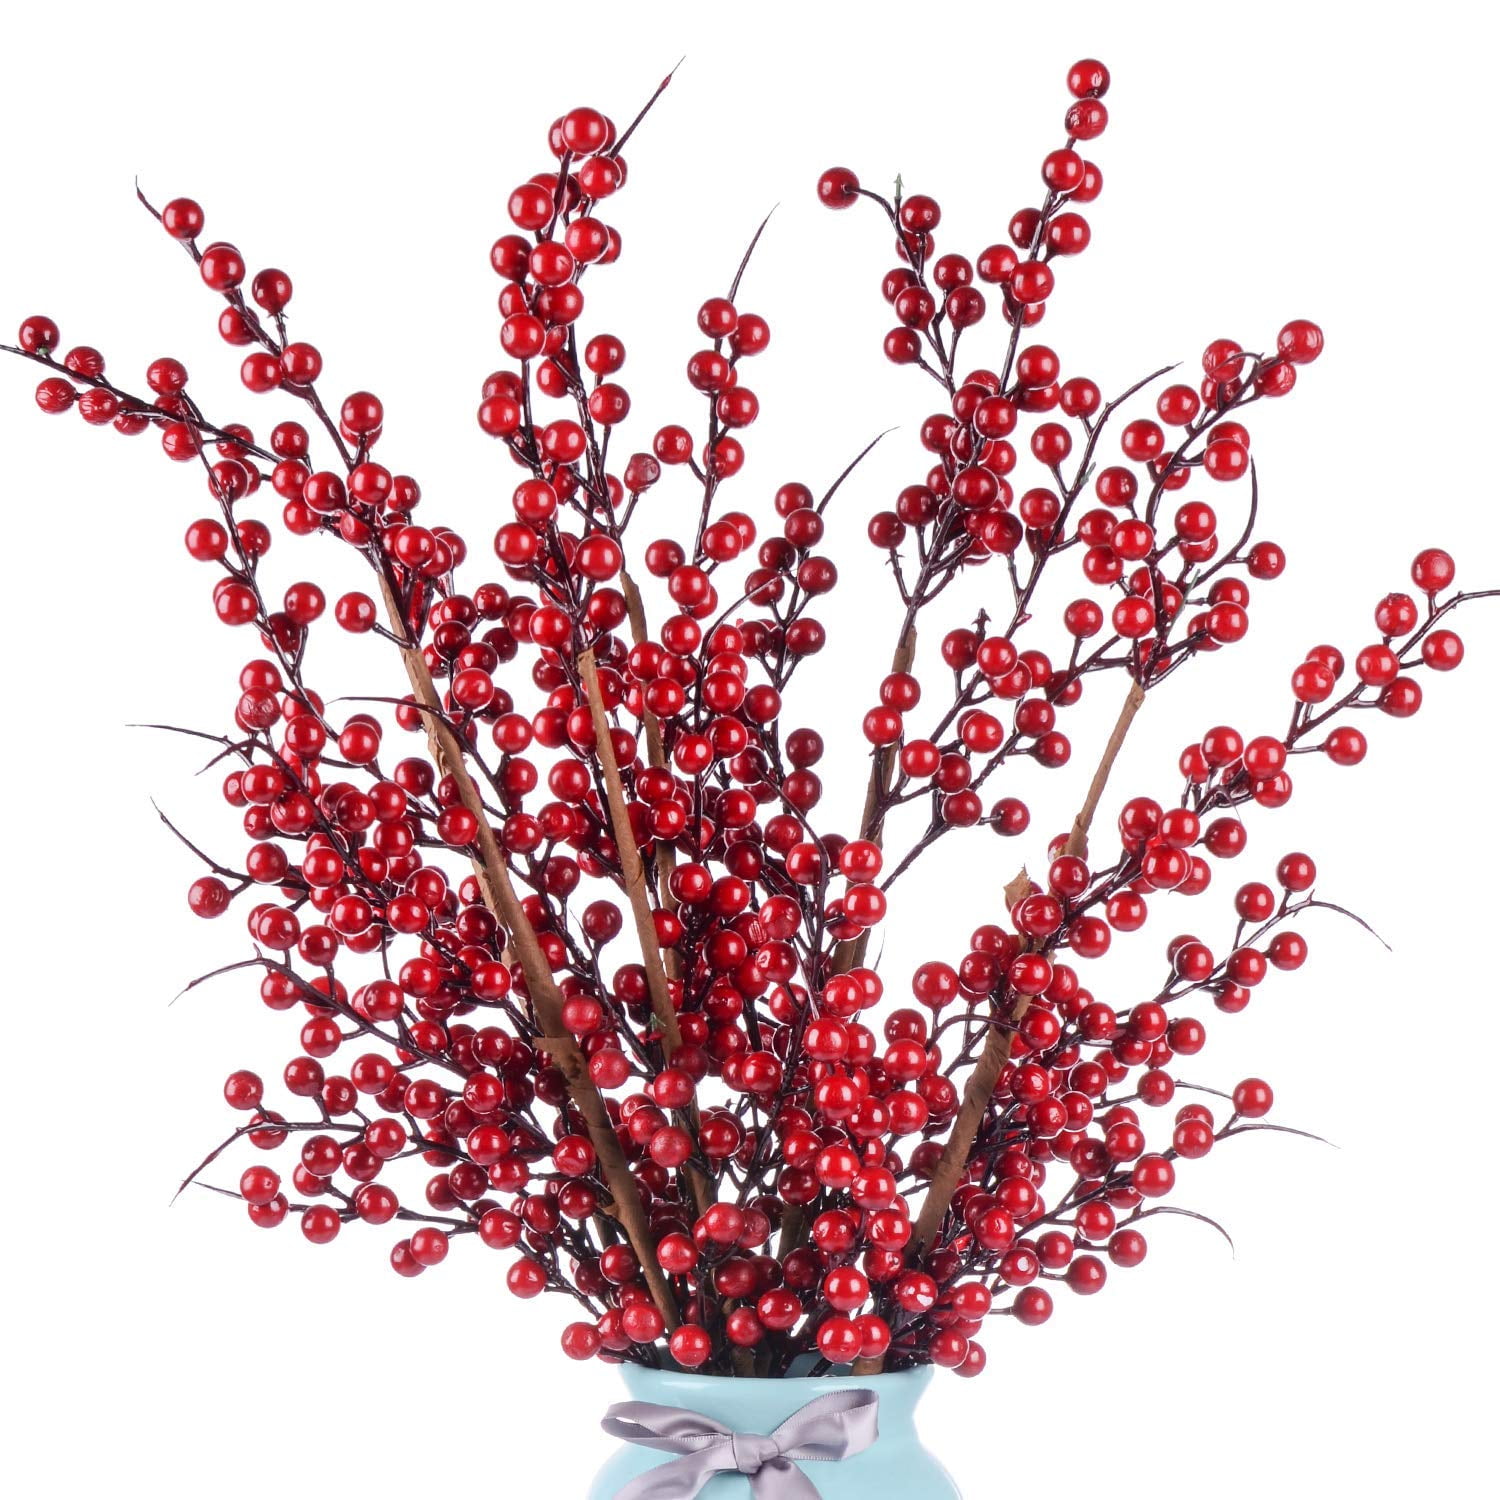 Lvydec 4 Pack Artificial Red Berry Stems 20 Inch Christmas Holly Berry Branches for Holiday Home Decor and Crafts